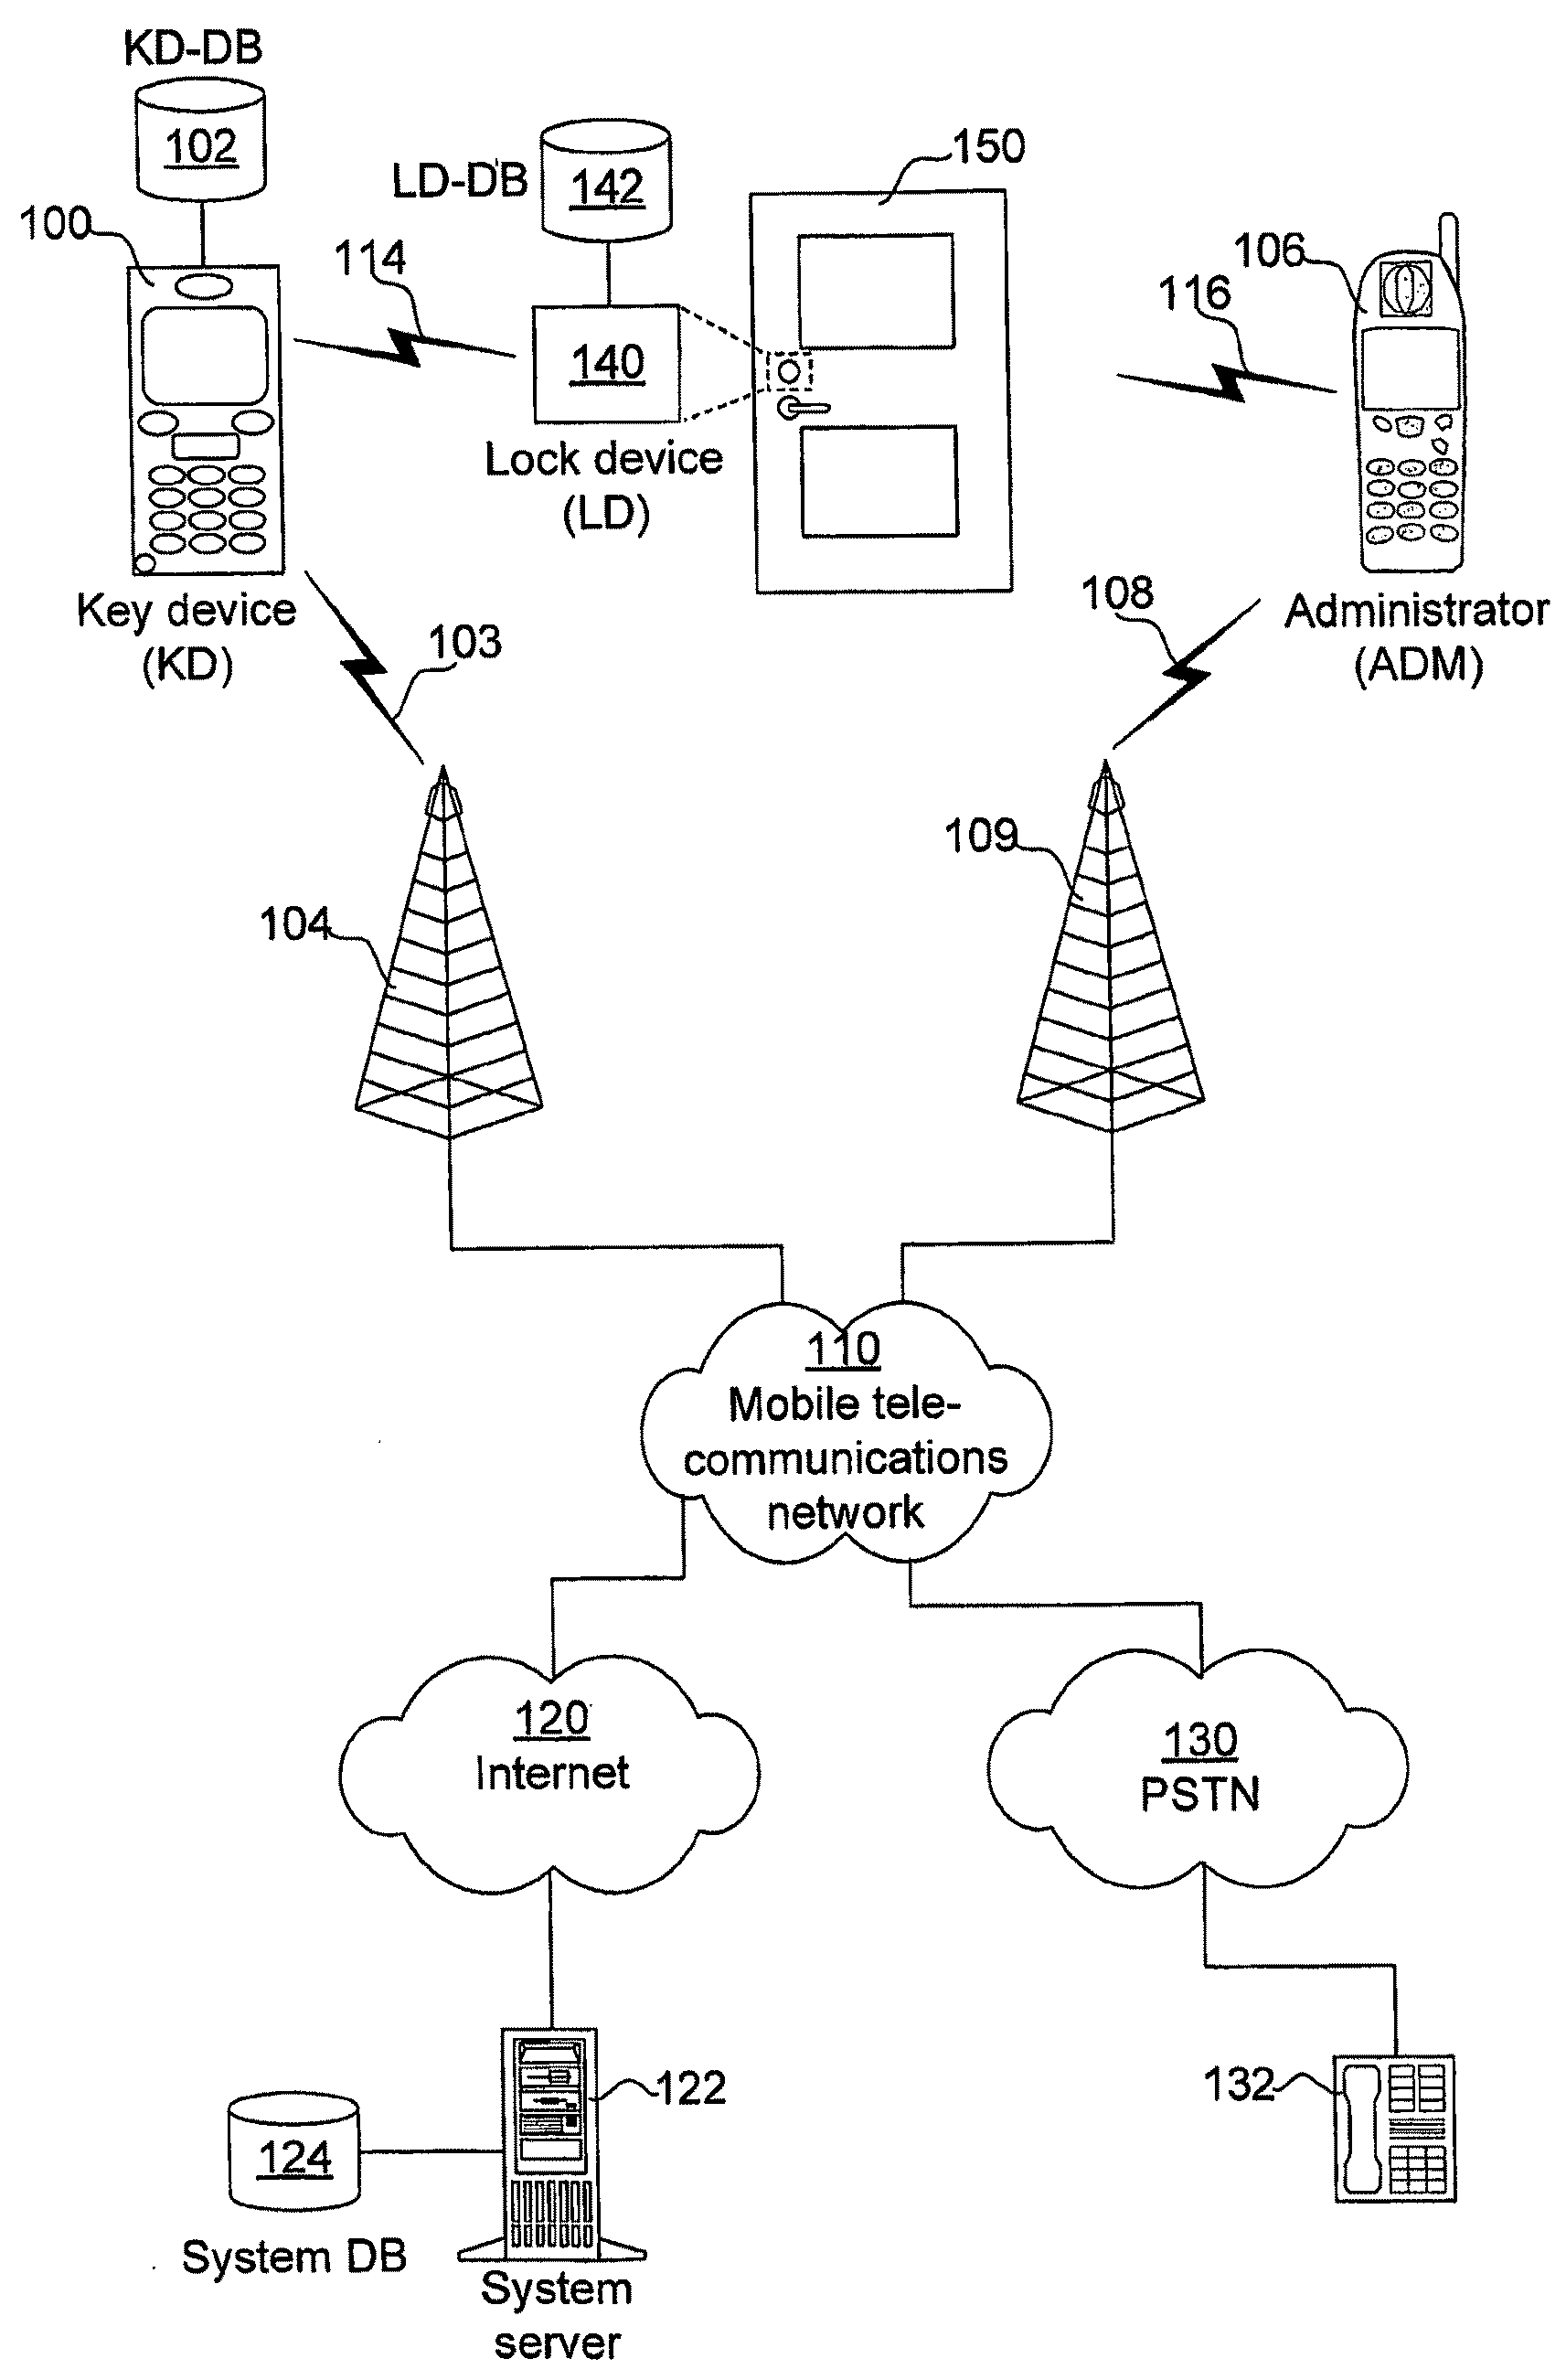 Method for Unlocking a Lock by a Lock Device Enabled for Short-Range Wireless Data Communication in Compliance With a Communication Standard and Associated Device